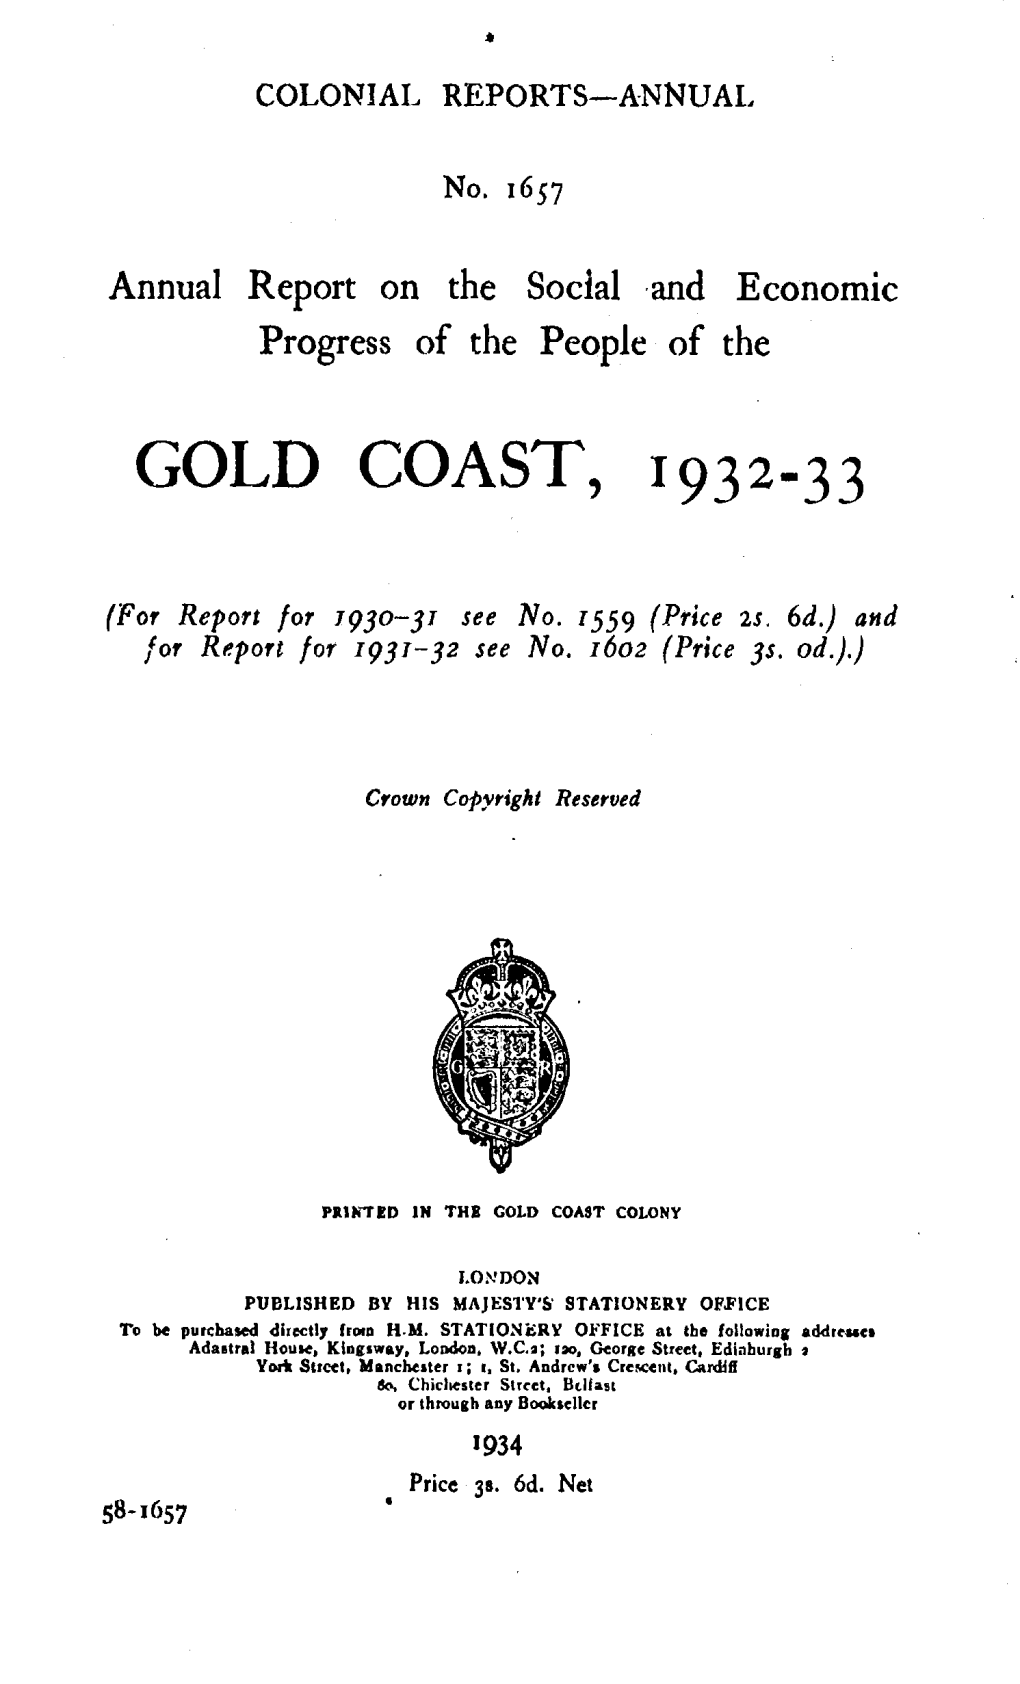 Annual Report of the Colonies, Gold Coast, 1932-33